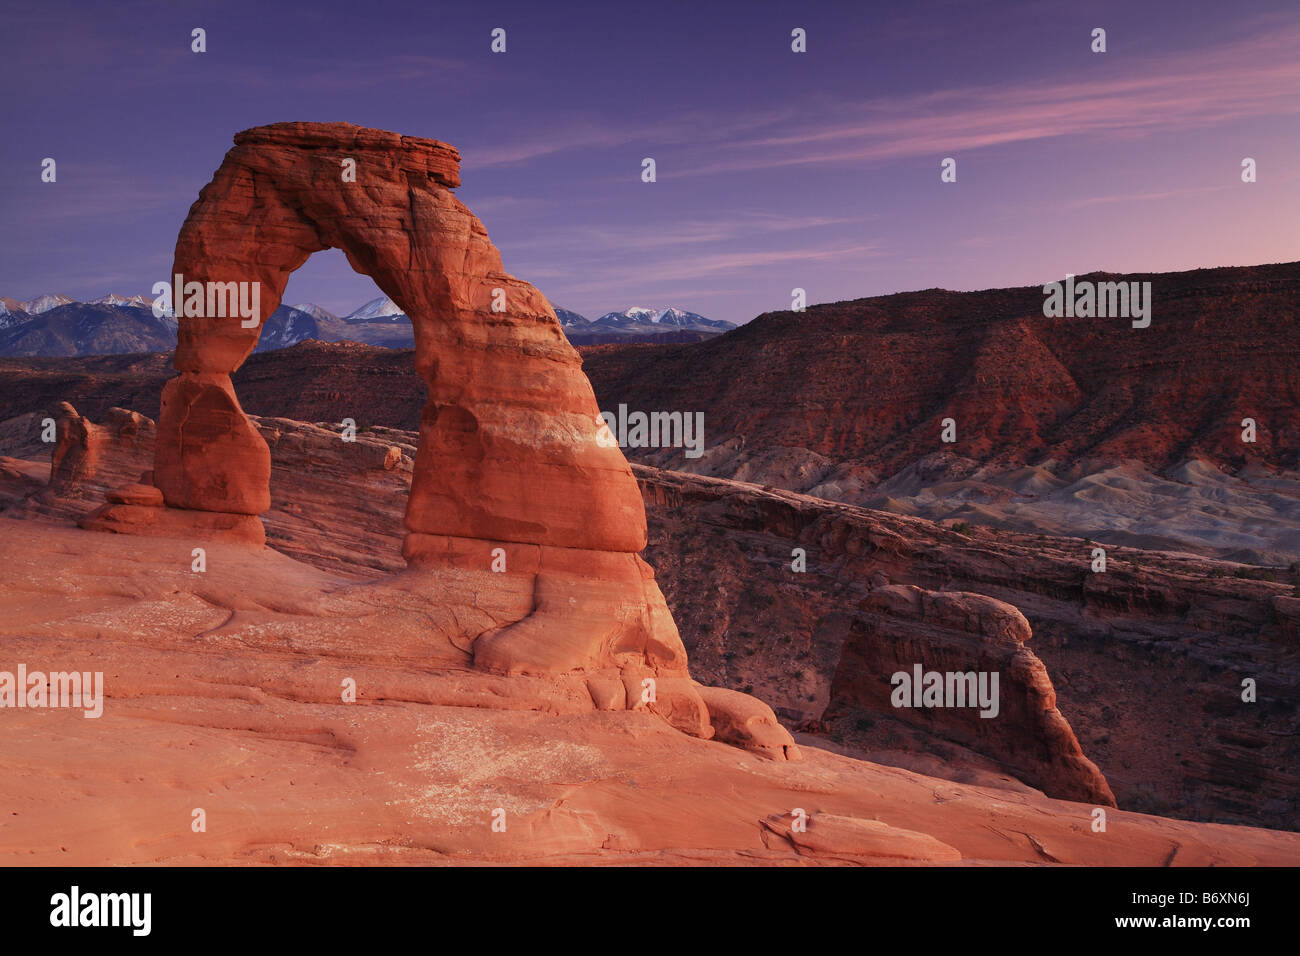 Dusk at Delicate Arch, Arches National Park, Utah, USA Stock Photo